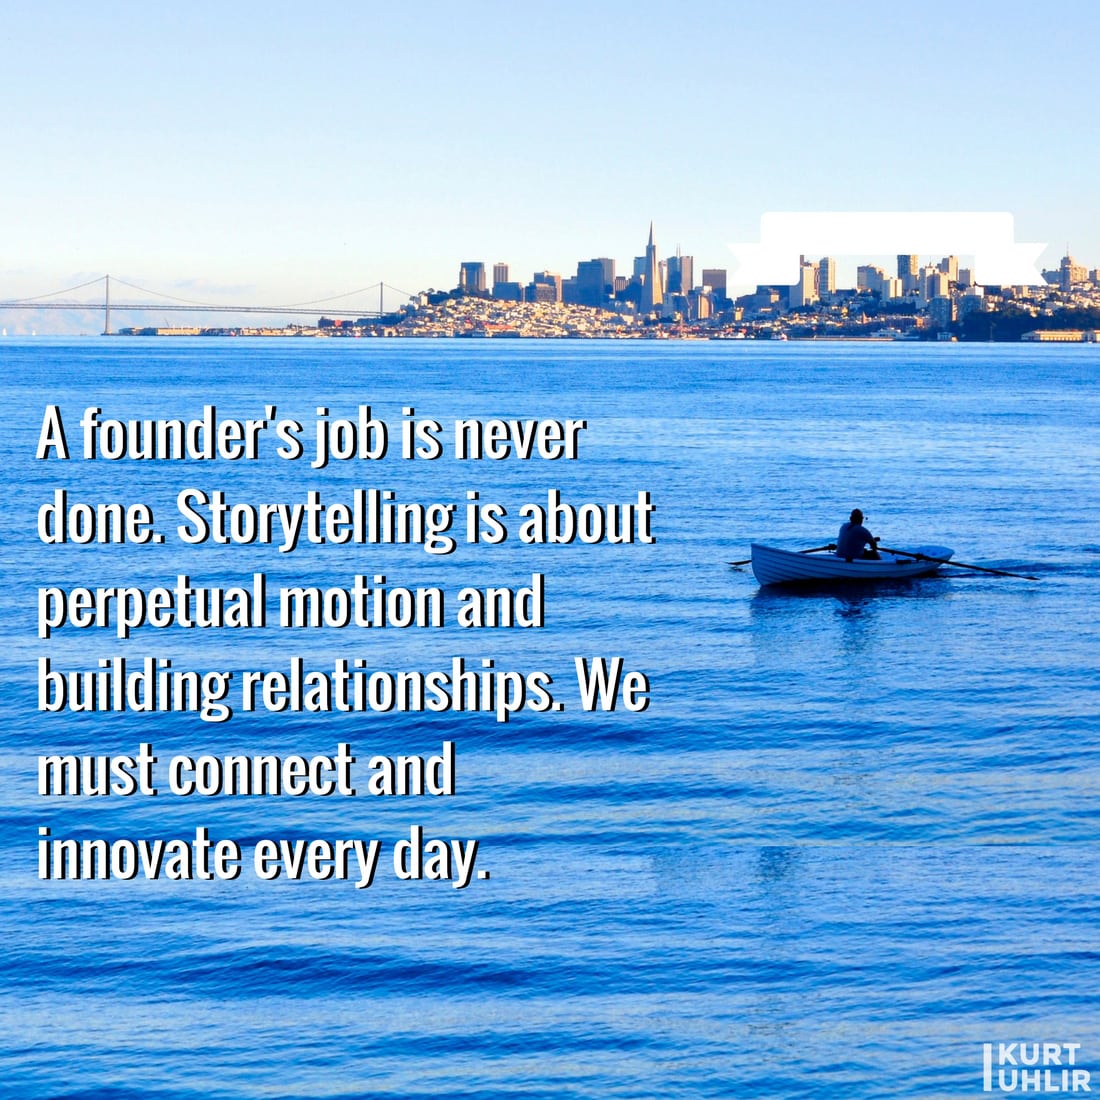 A founder's job is never done. Storytelling is about perpetual motion and building relationships. We must connect and innovate every day - Kurt Uhlir entrepreneur quote | Leadership | Motivation | Entrepreneurship | Founders